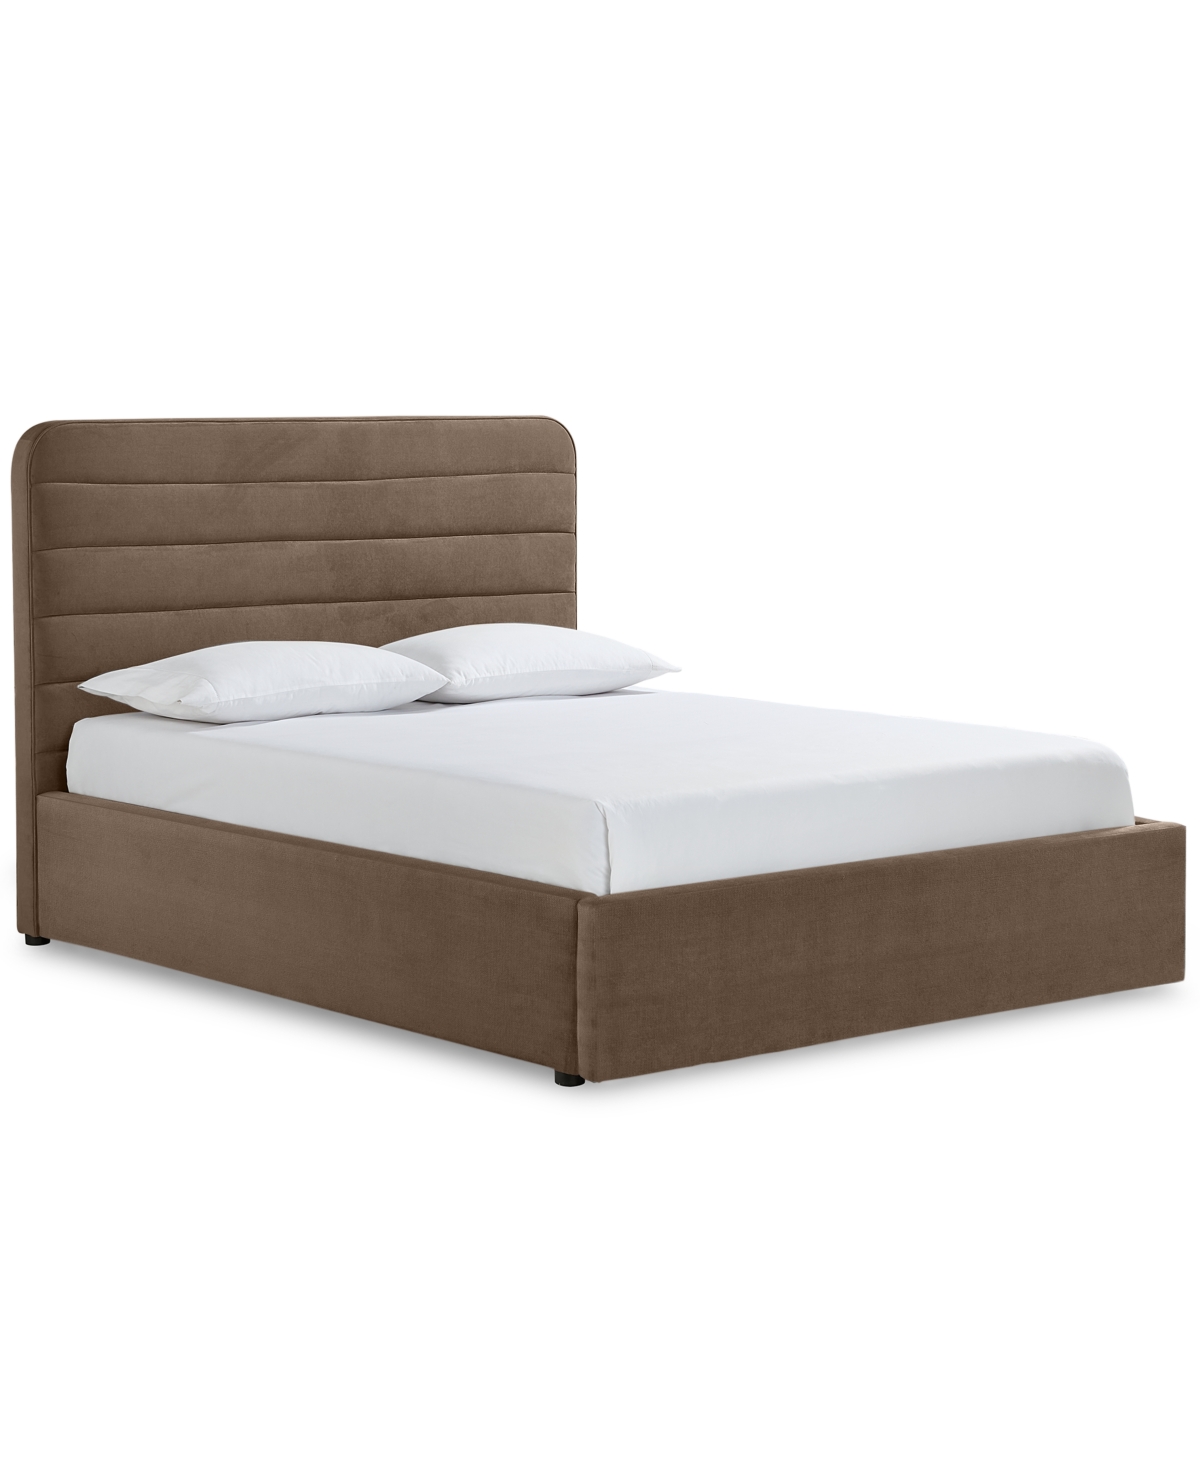 Furniture Haryan Twin Upholstered Storage Bed In Taupe